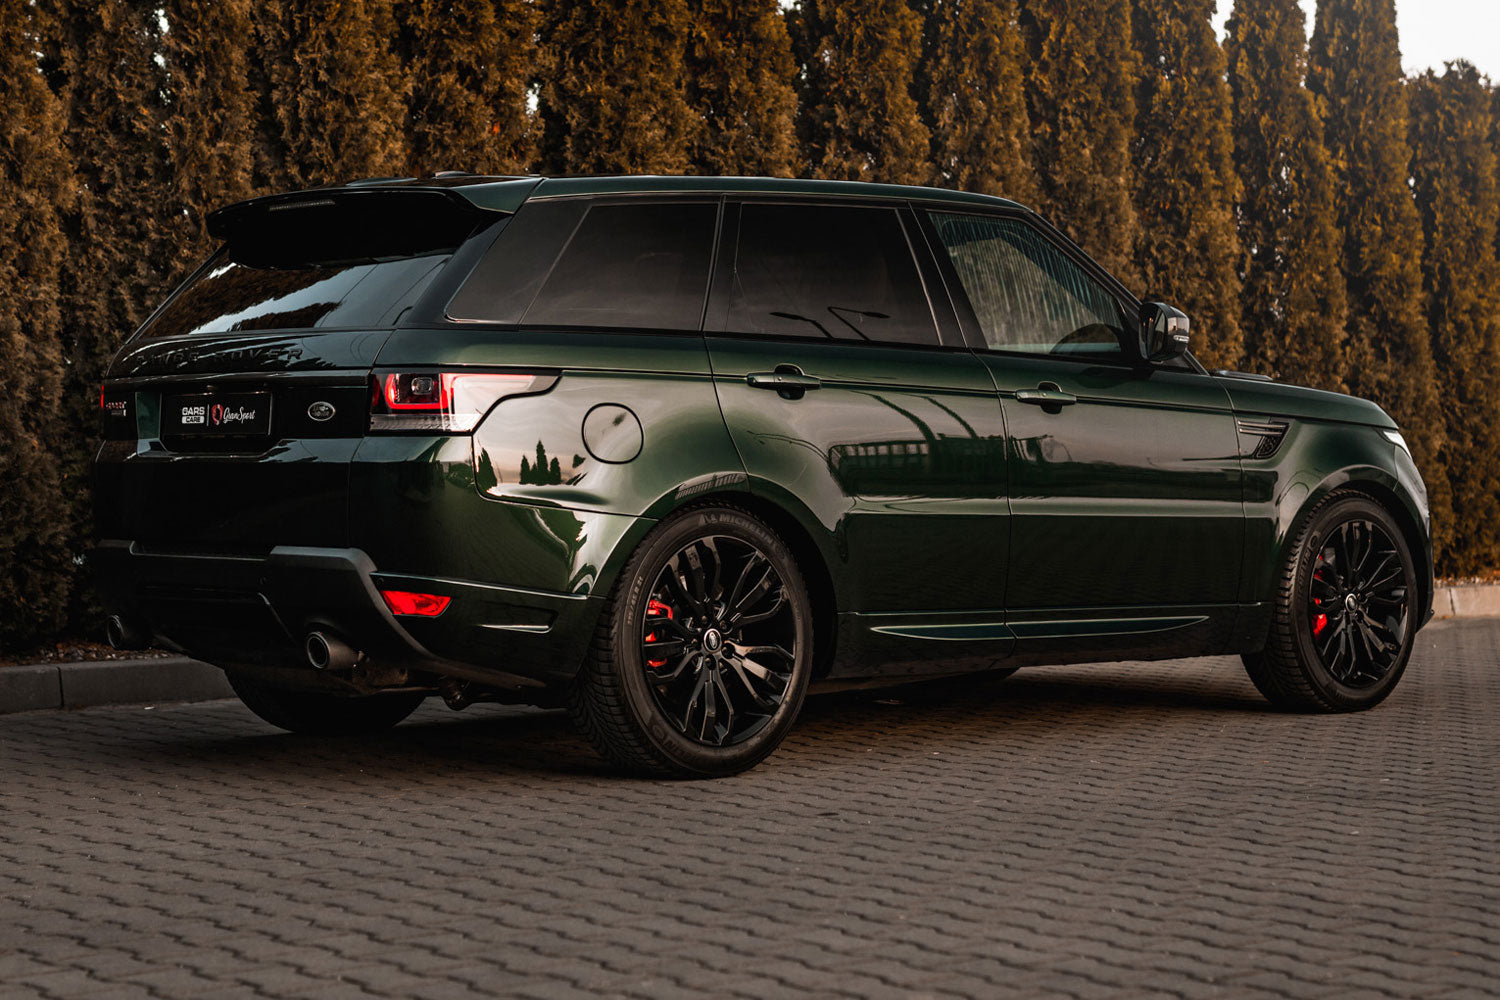 Range Rover Sport 5.0 V8 SuperCharged - Sport Exhaust (2014 on) - 0